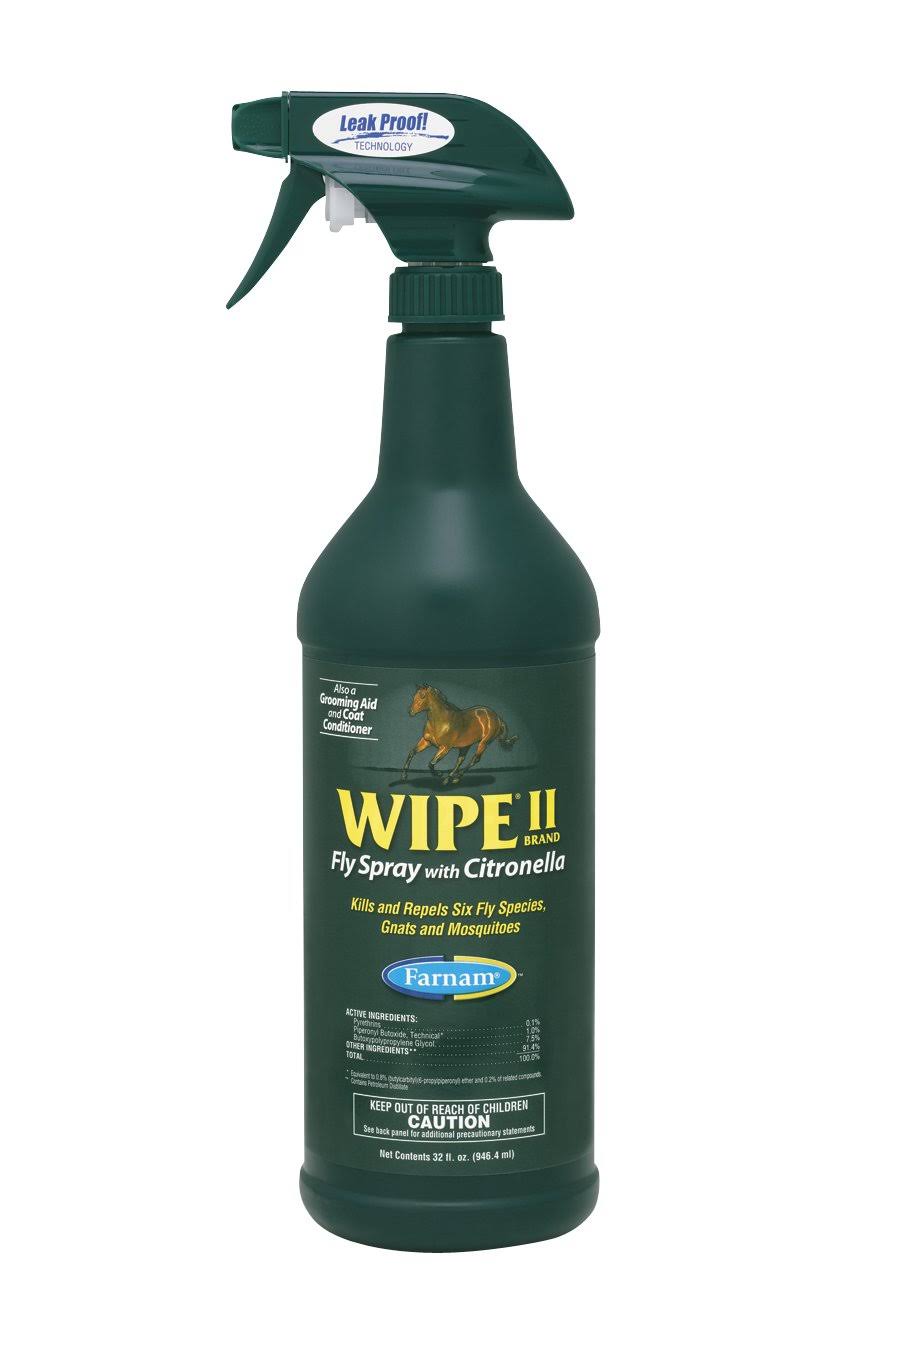 Wipe II Citronella Insecticide Fly Repellent Horses Dogs Equine Spray - 32oz